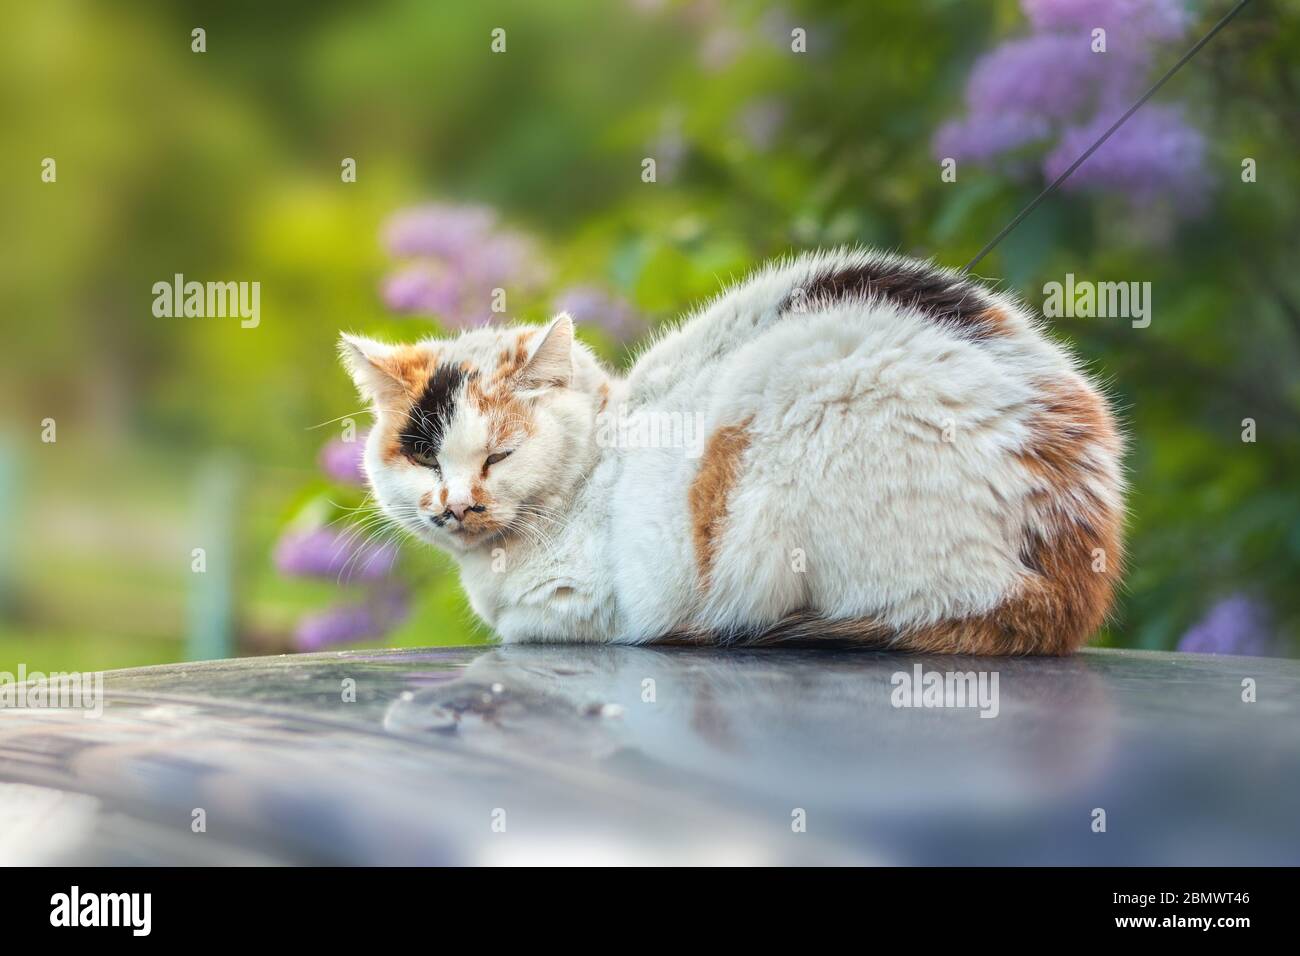 A homeless white-red cat sits on the roof of a car against a background of green nature. Stock Photo